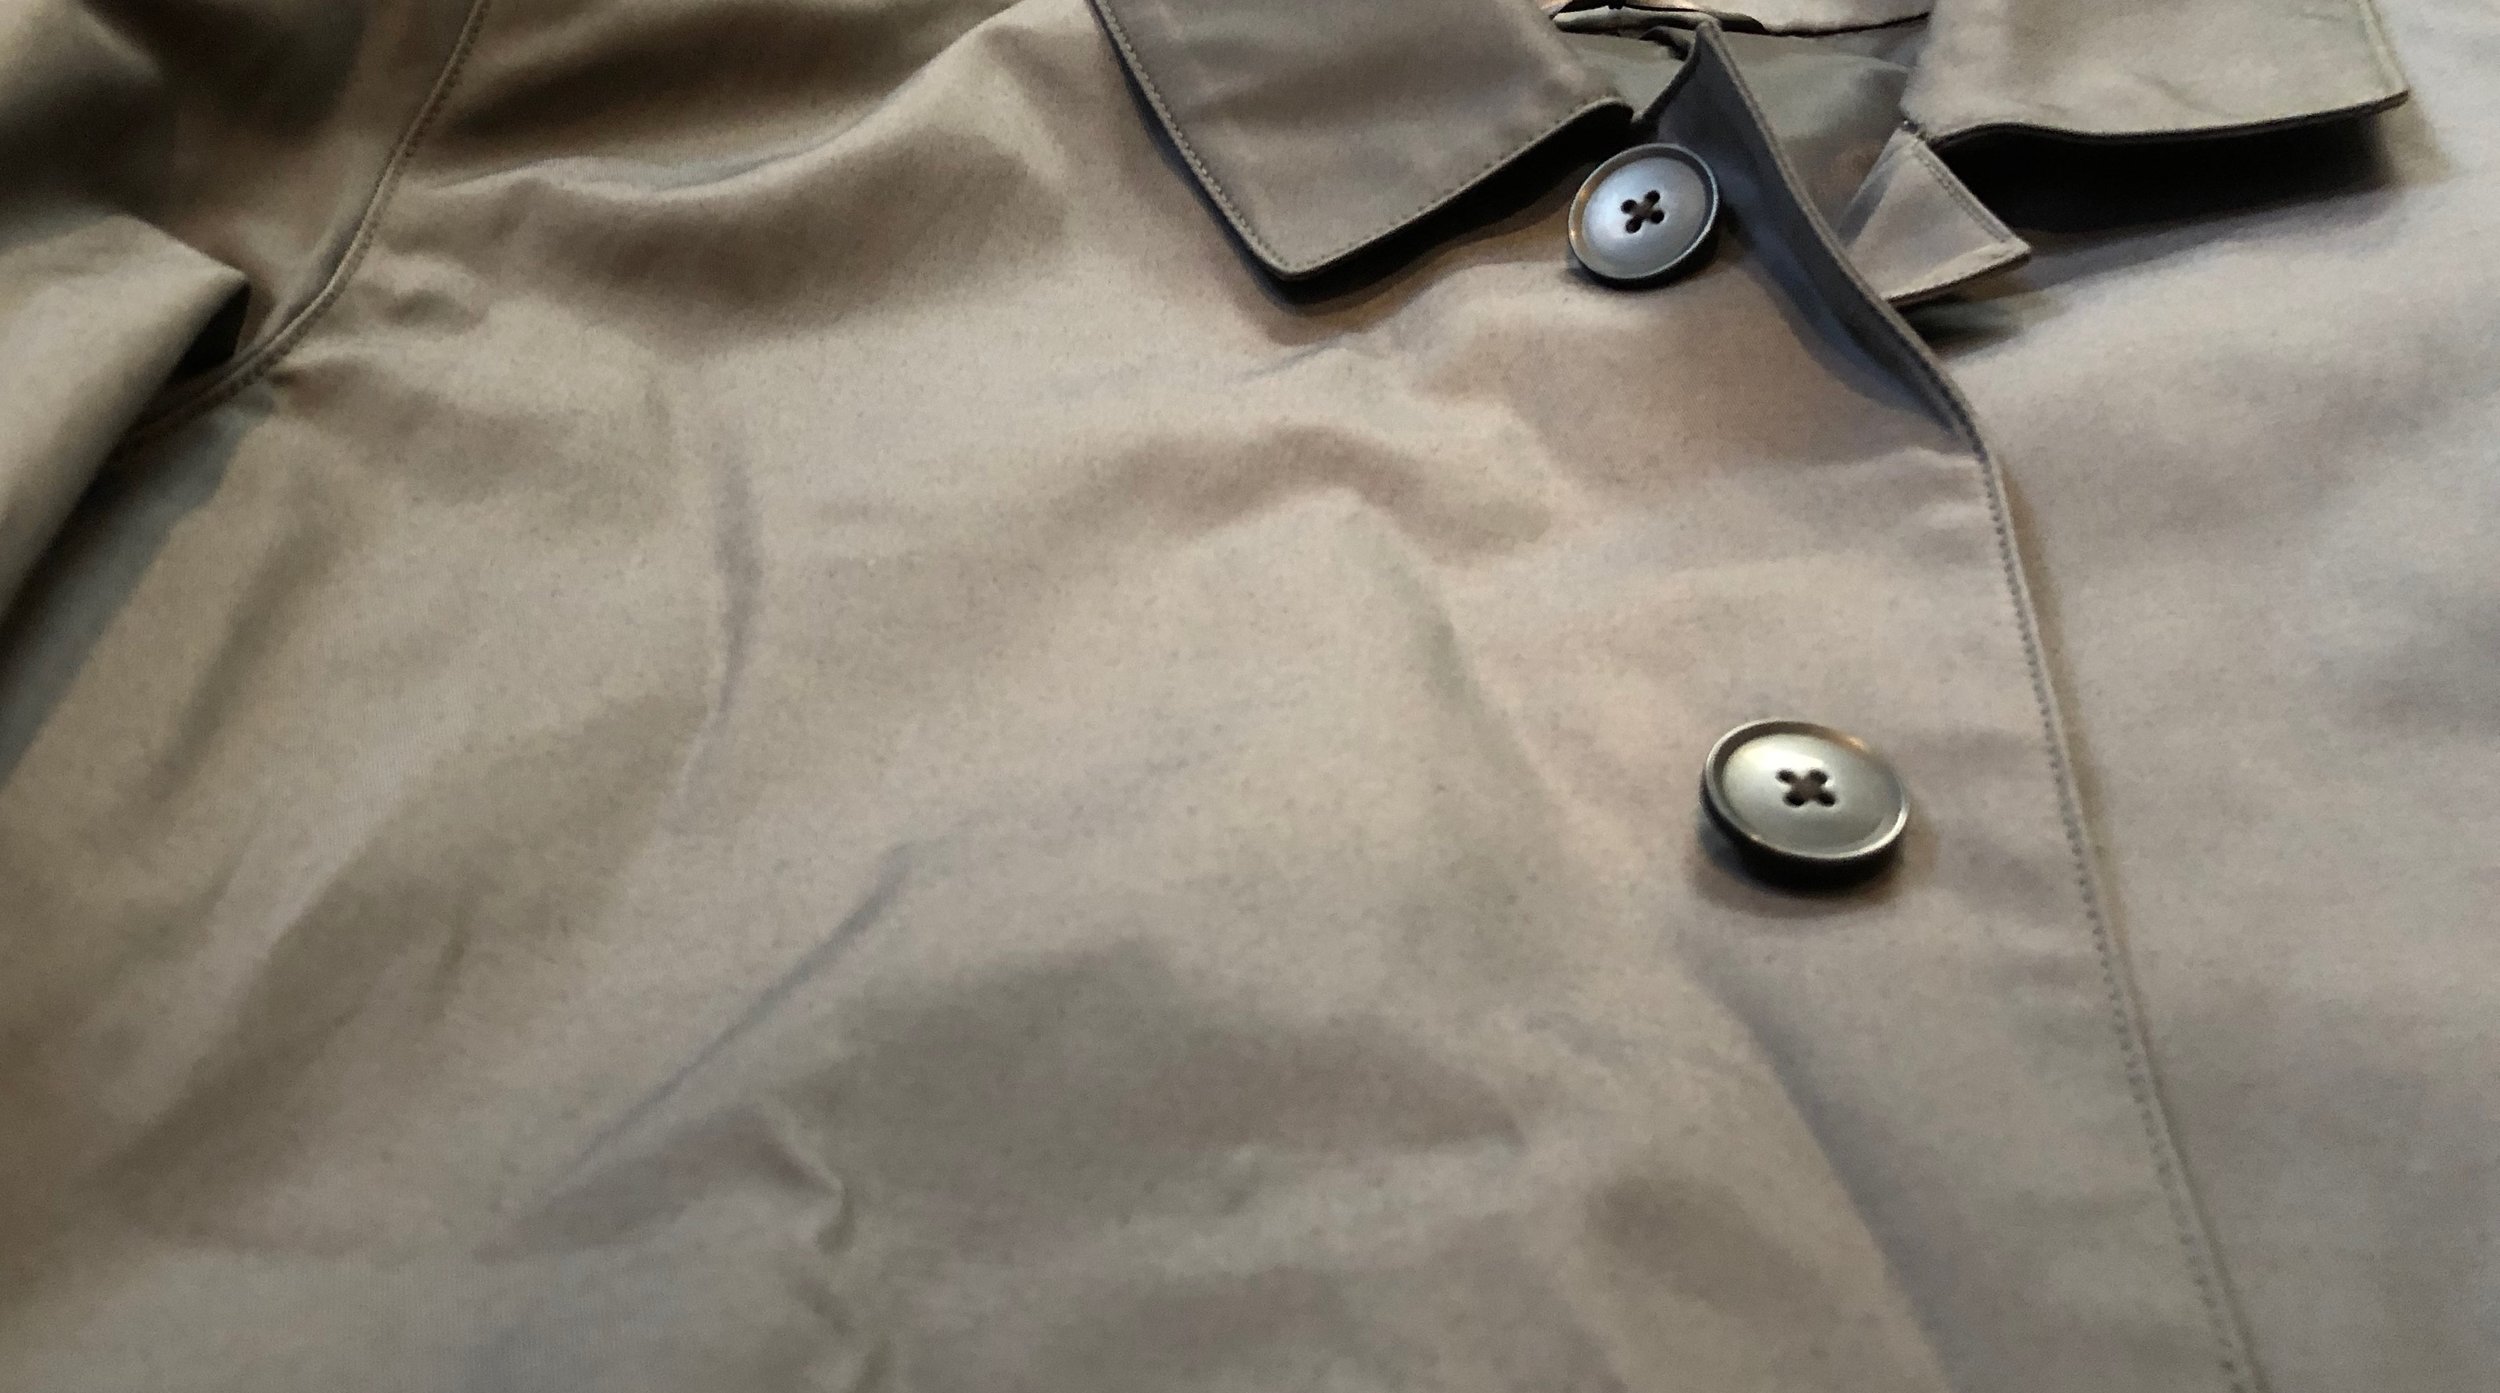 A Review of T.M. Lewin’s Outerwear — Quilted Jacket & Raincoat — The ...